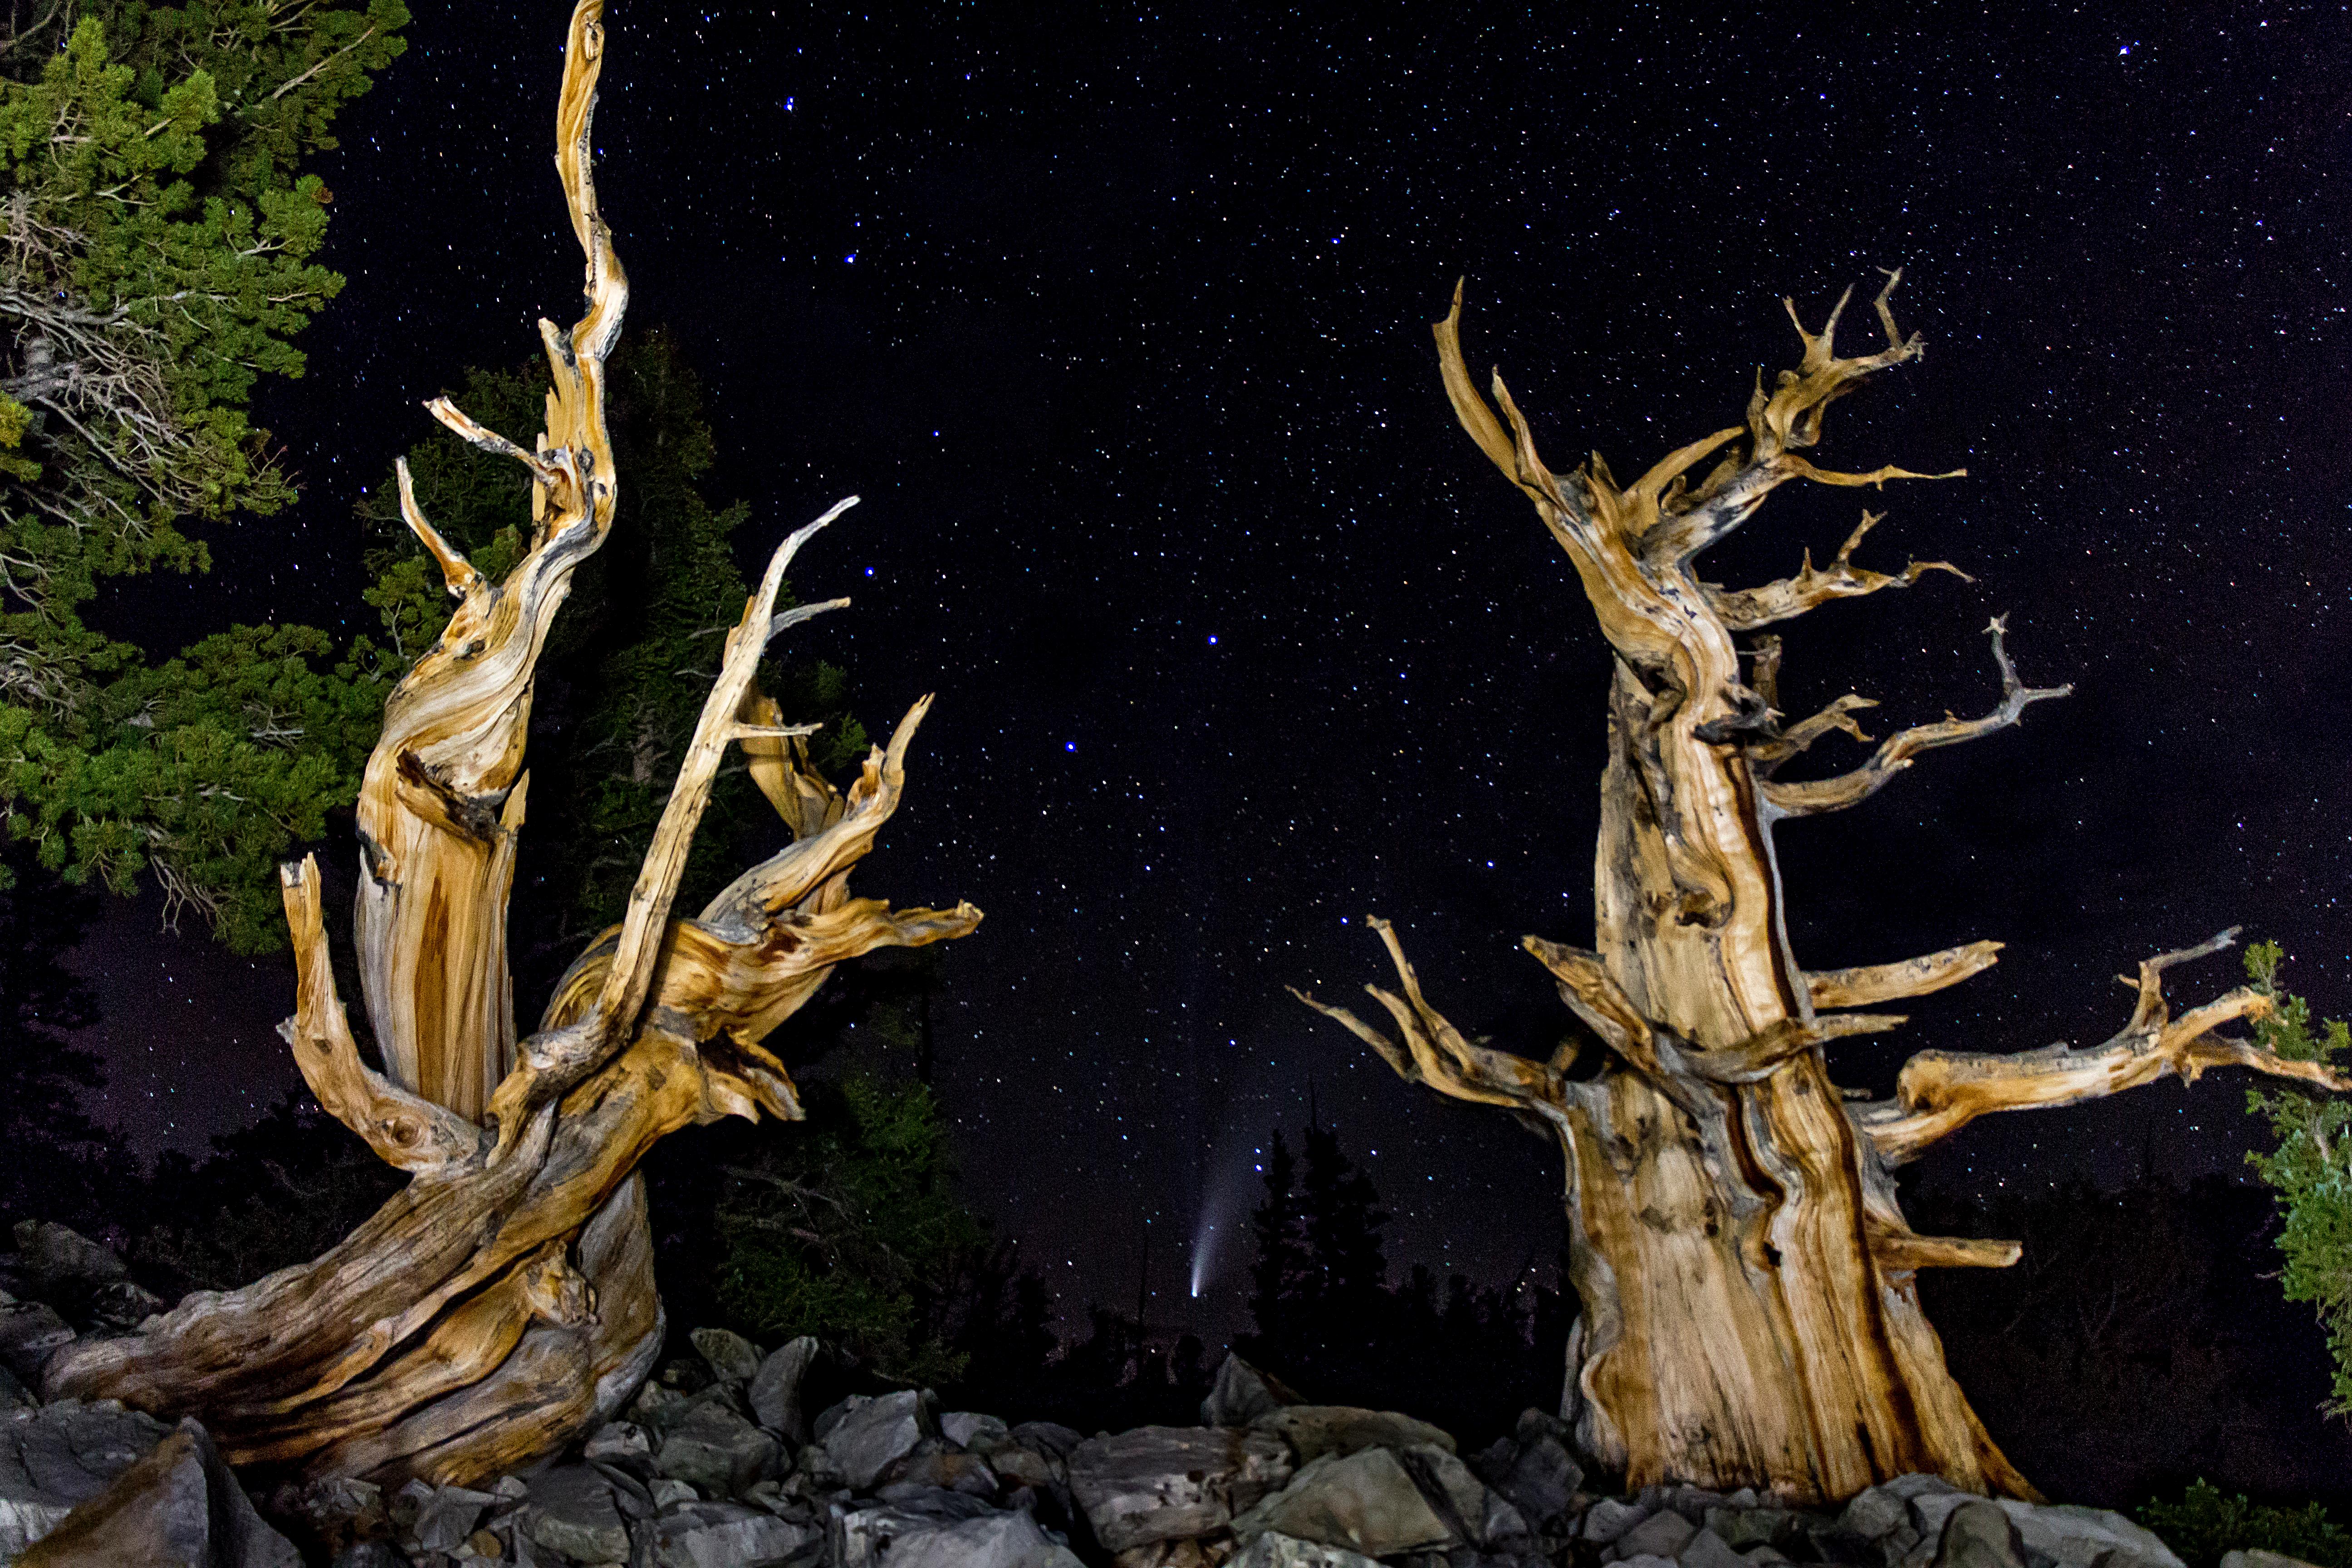 Ancient bristlecone with comet NEOWISE in the background